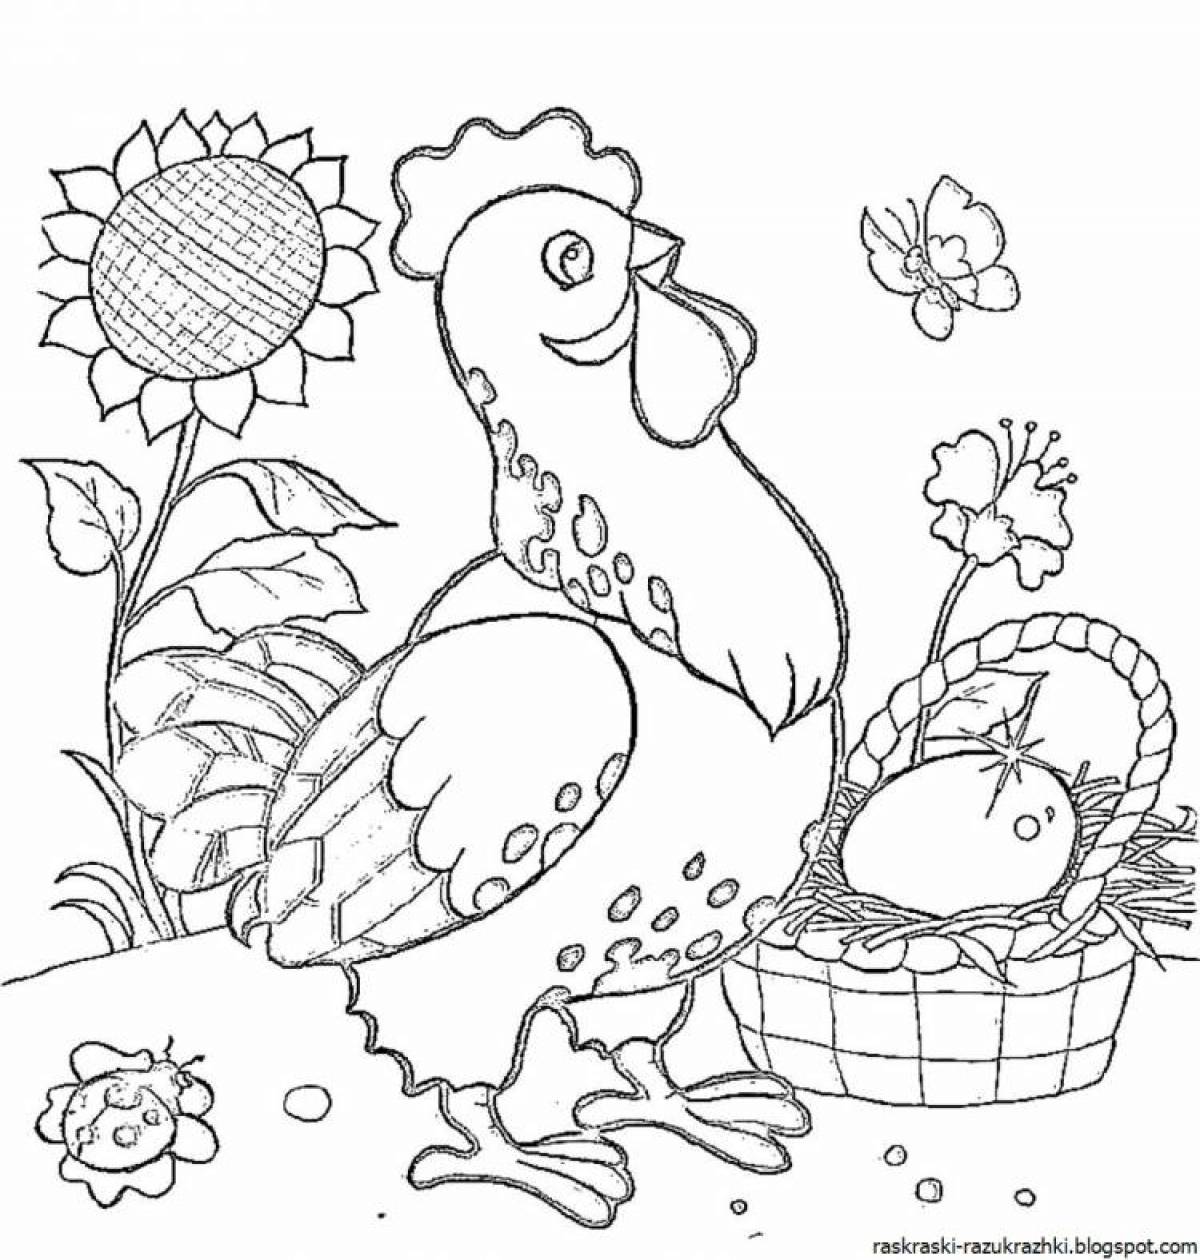 Colorful chicken coloring book